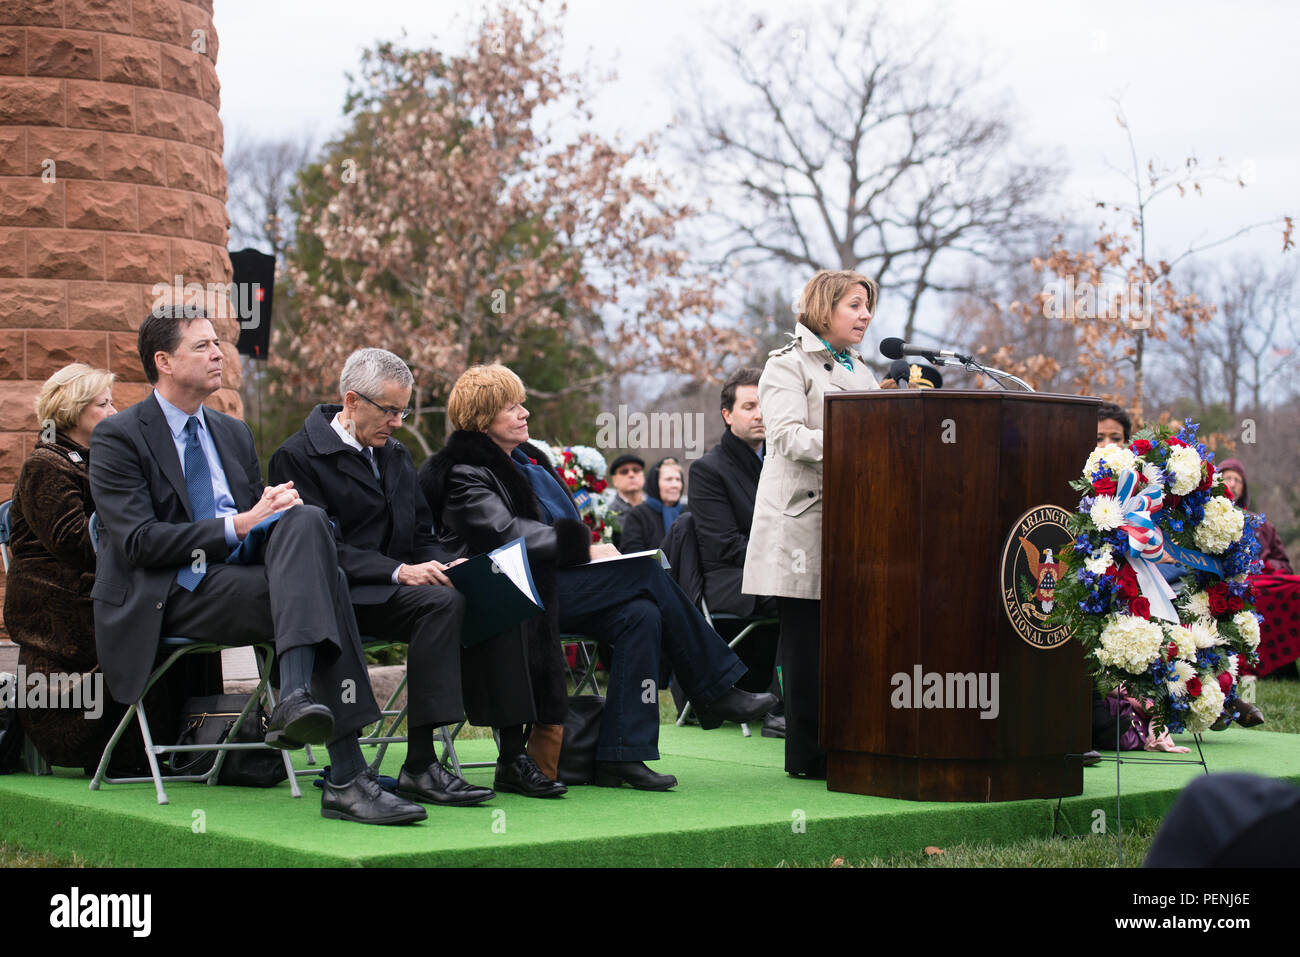 Lisa Monaco, assistant to the president for homeland security and counterterrorism, gives remarks during the Pan Am Flight 103 memorial ceremony in Arlington National Cemetery, Dec. 21, 2015, in Arlington, Va. A terrorist’s bomb destroyed the aircraft 27 years ago, in what became known as the “Lockerbie bombing,” killing 243 passengers, 16 crew members and 11 people on the ground. (U.S. Army photo by Rachel Larue/Arlington National Cemetery/released) Stock Photo